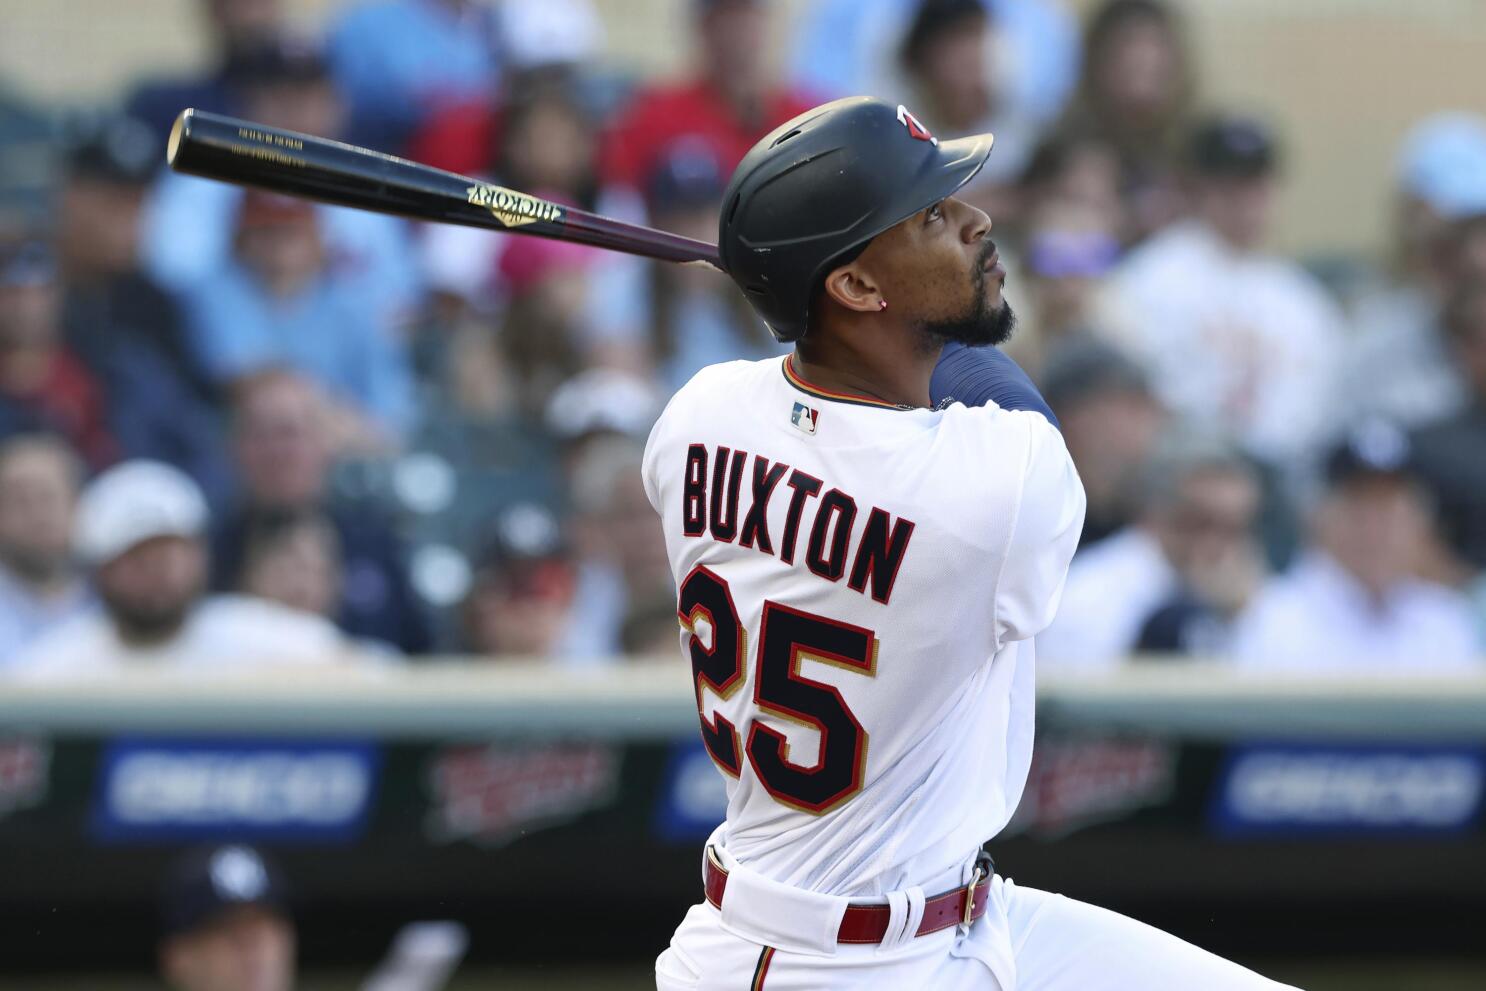 Giancarlo Stanton and Byron Buxton OBLITERATE back-to-back home